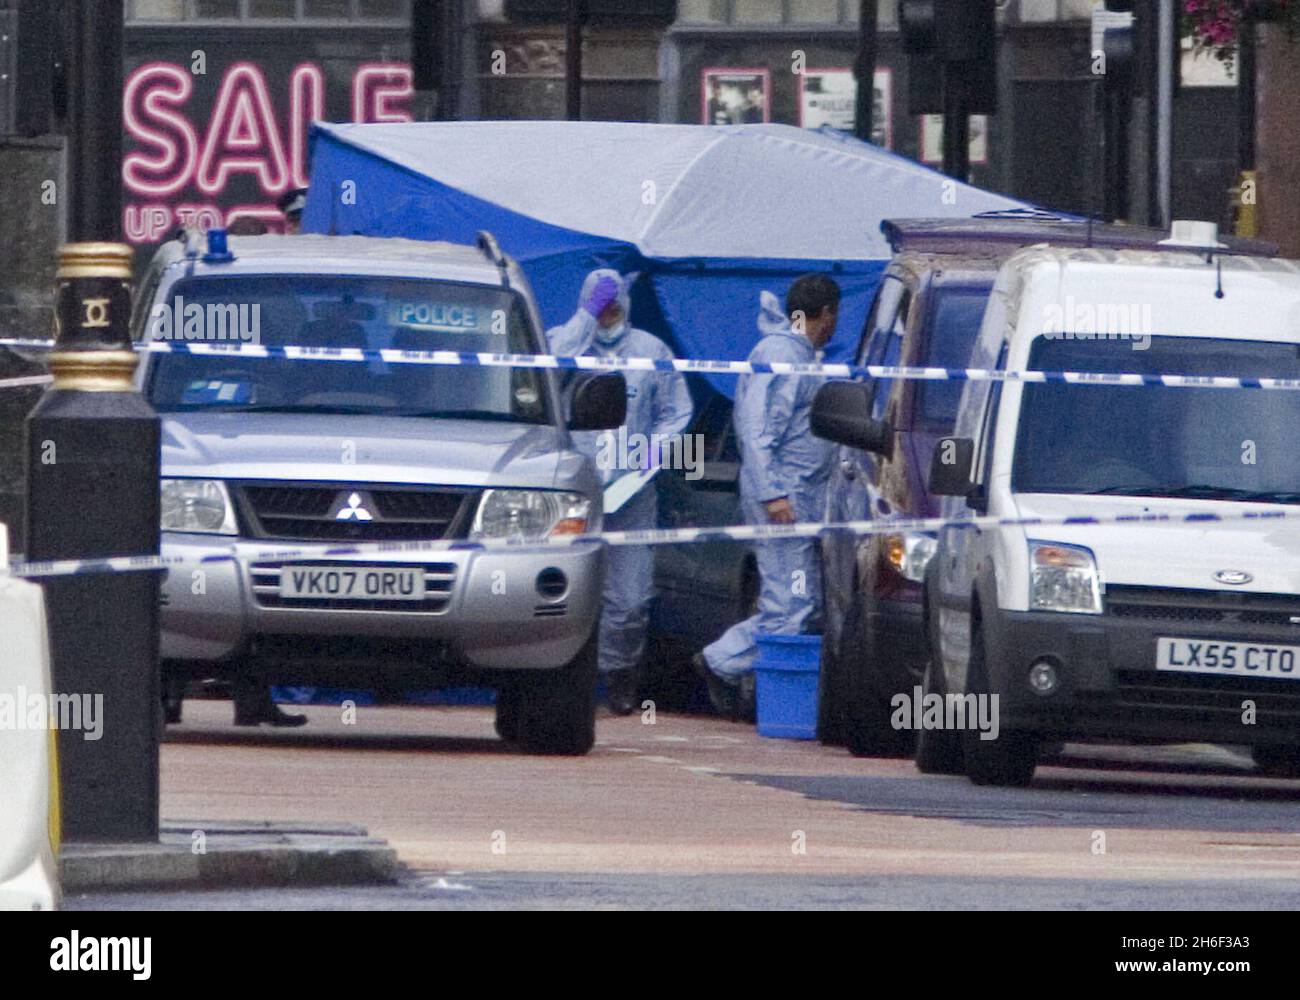 Police have disabled a car bomb containing gas cylinders in the heart of central London. Officers carried out a controlled explosion after reports of a suspicious vehicle parked in Haymarket shortly before 2am this morning. Stock Photo